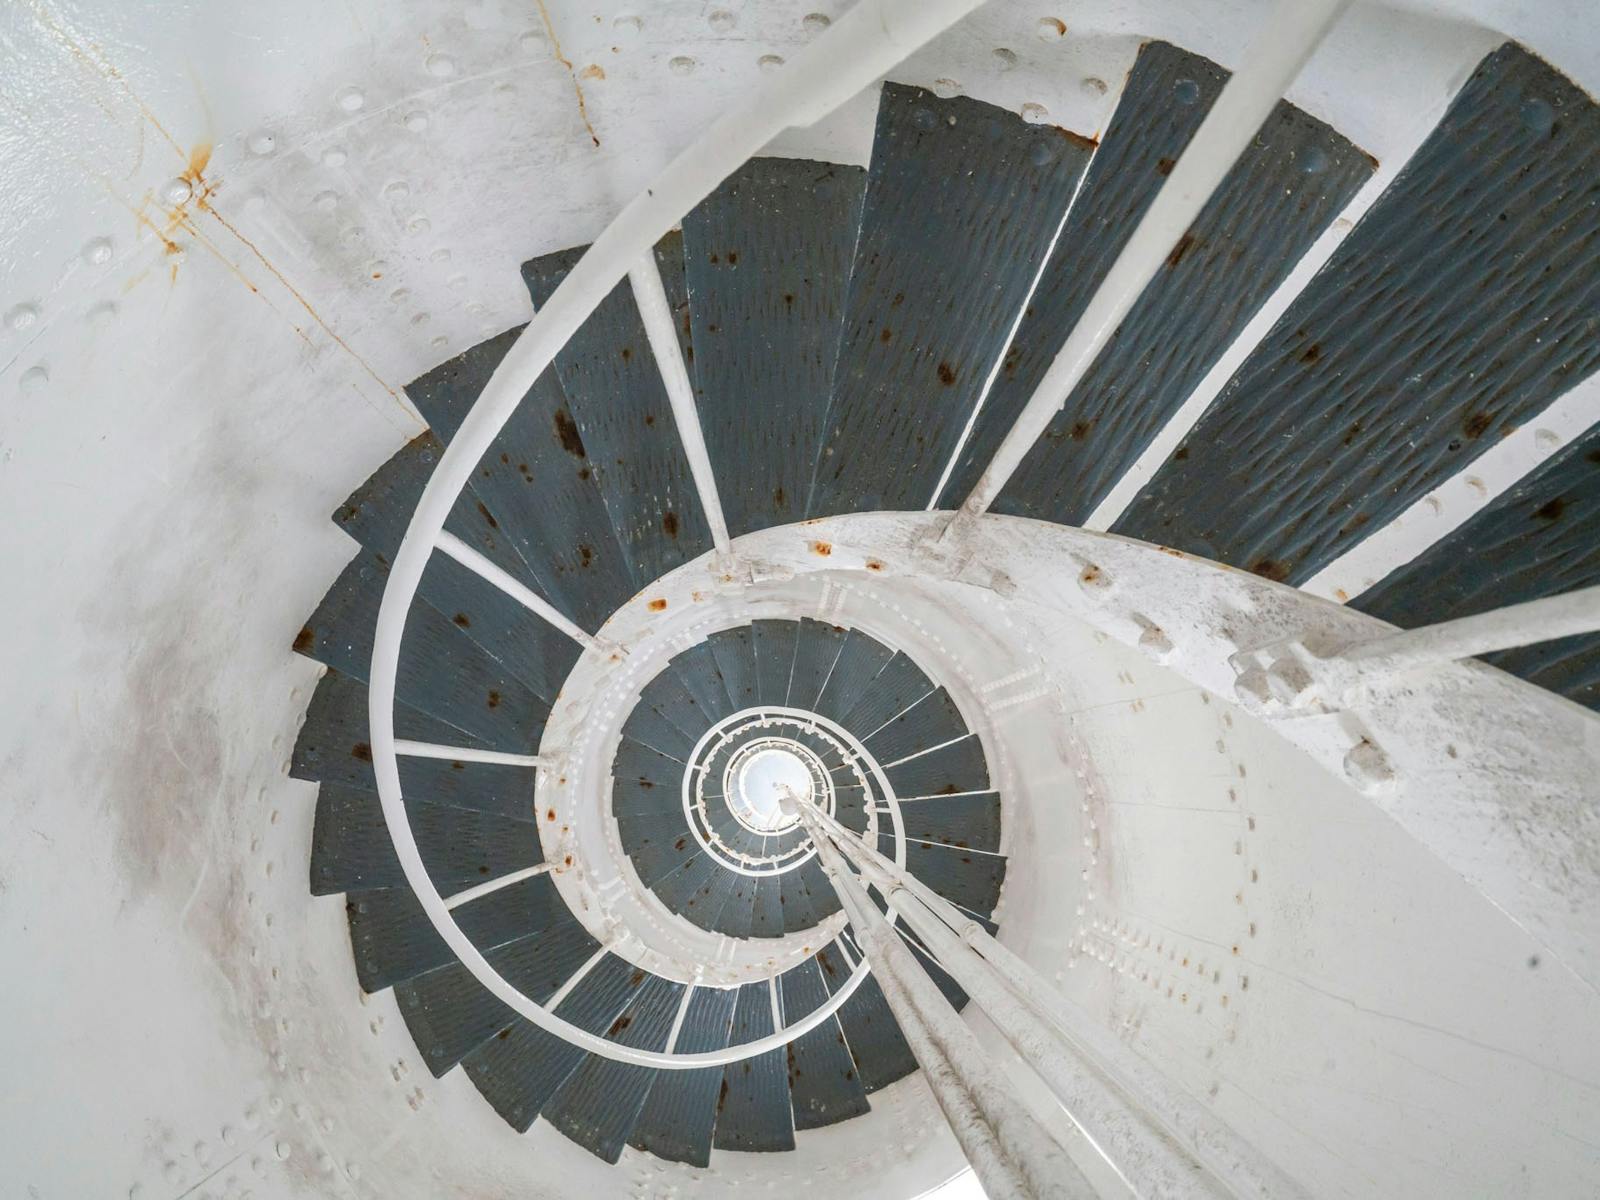 View looking down the spiral staircase of Currie Lighthouse